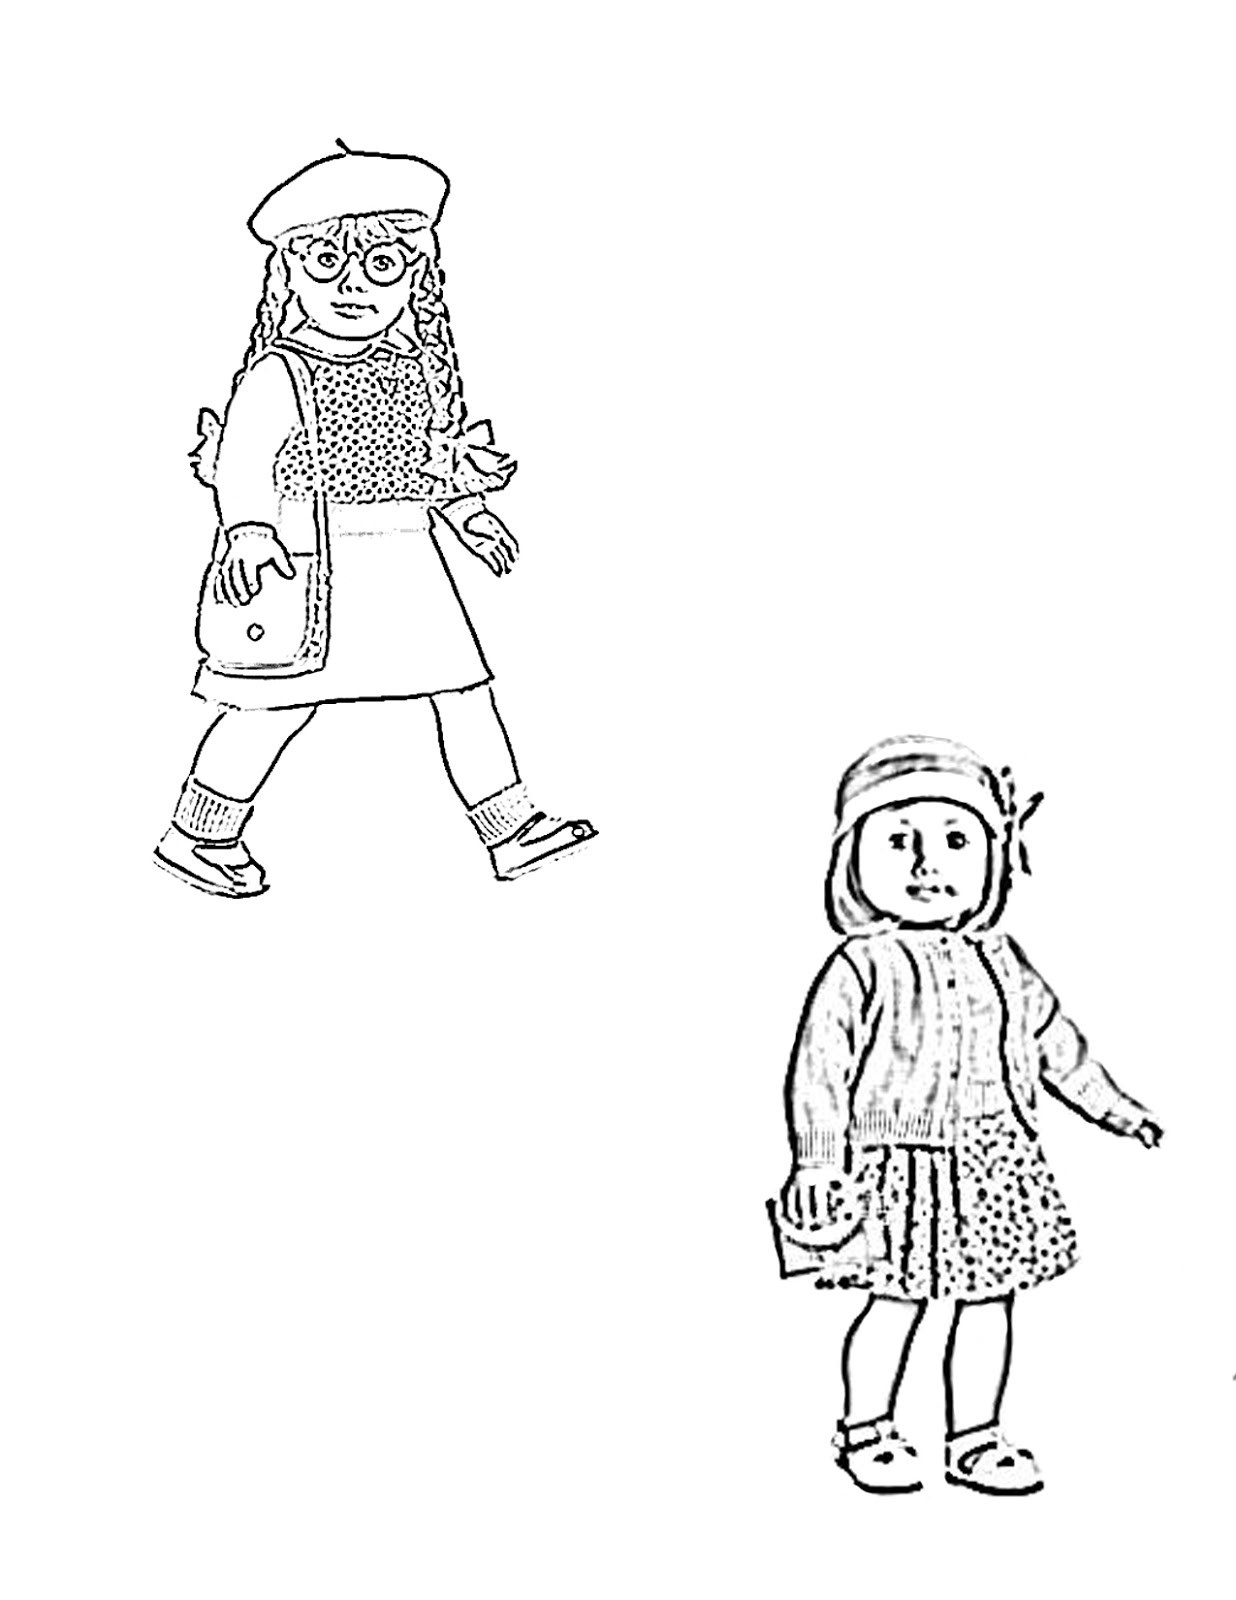 American Girl Dolls Coloring Pages
 My Cup Overflows Kit Kittredge An American Girl